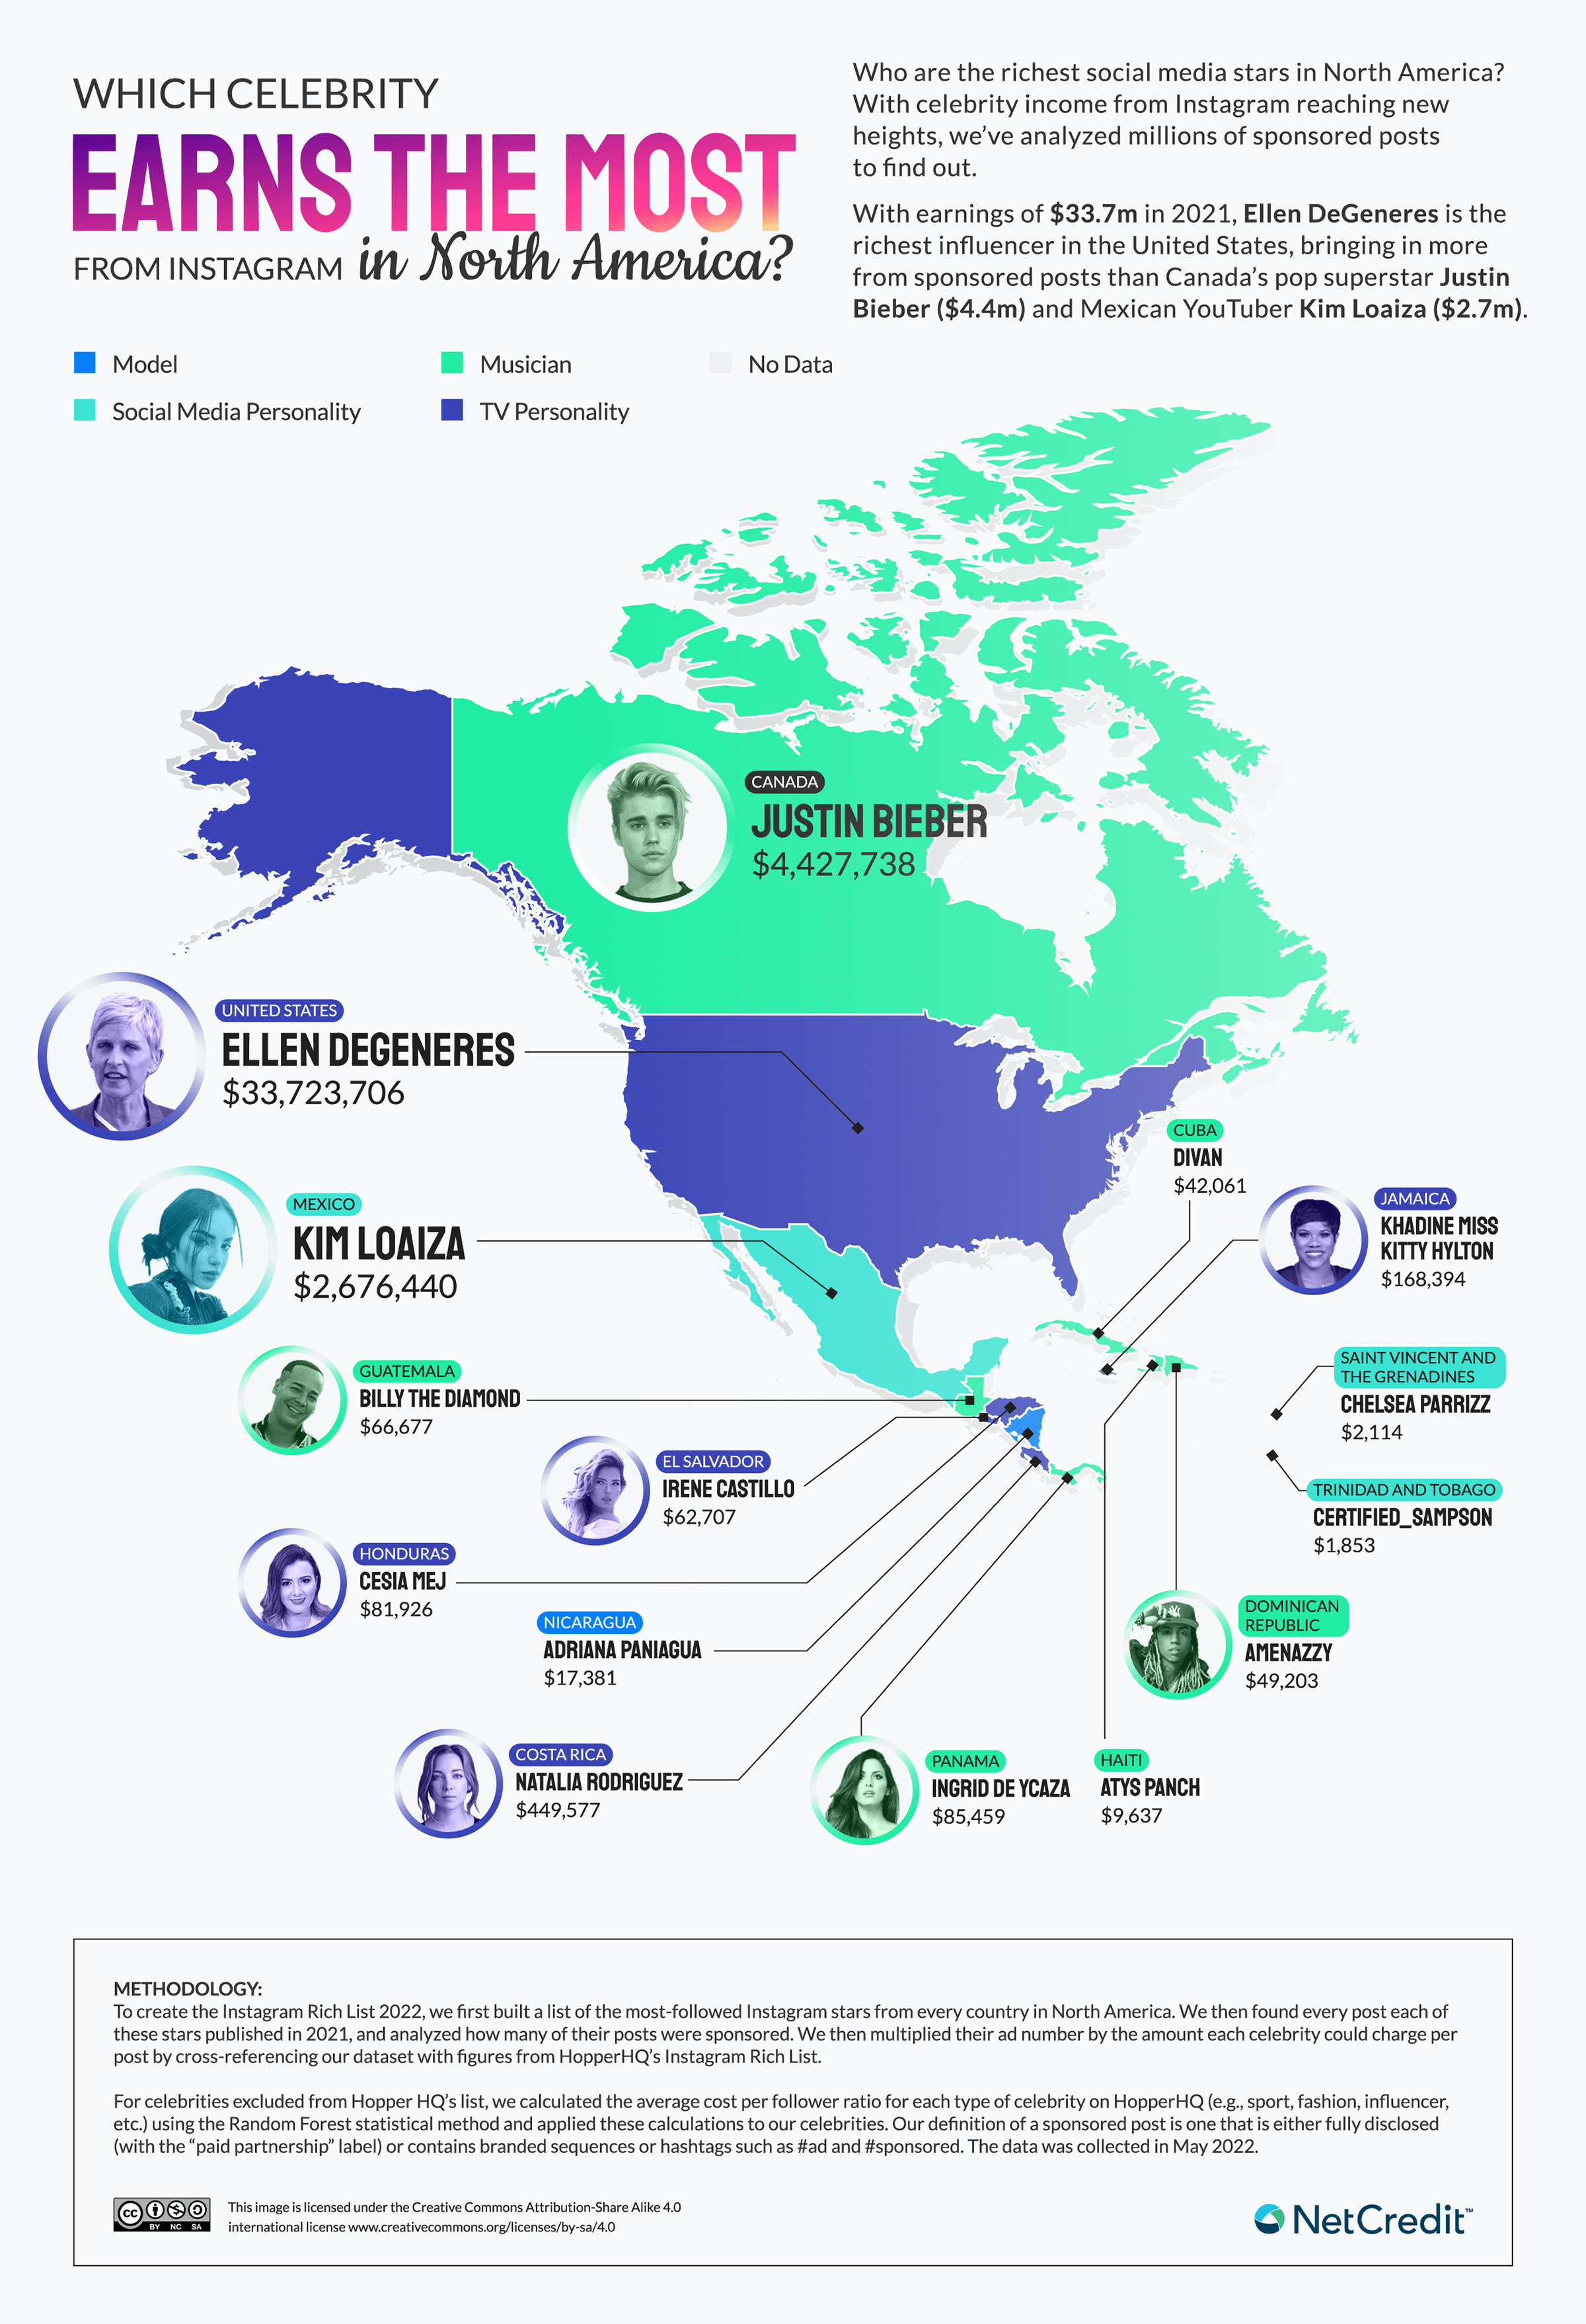 Map of North America with top-earning Instagram celebrities